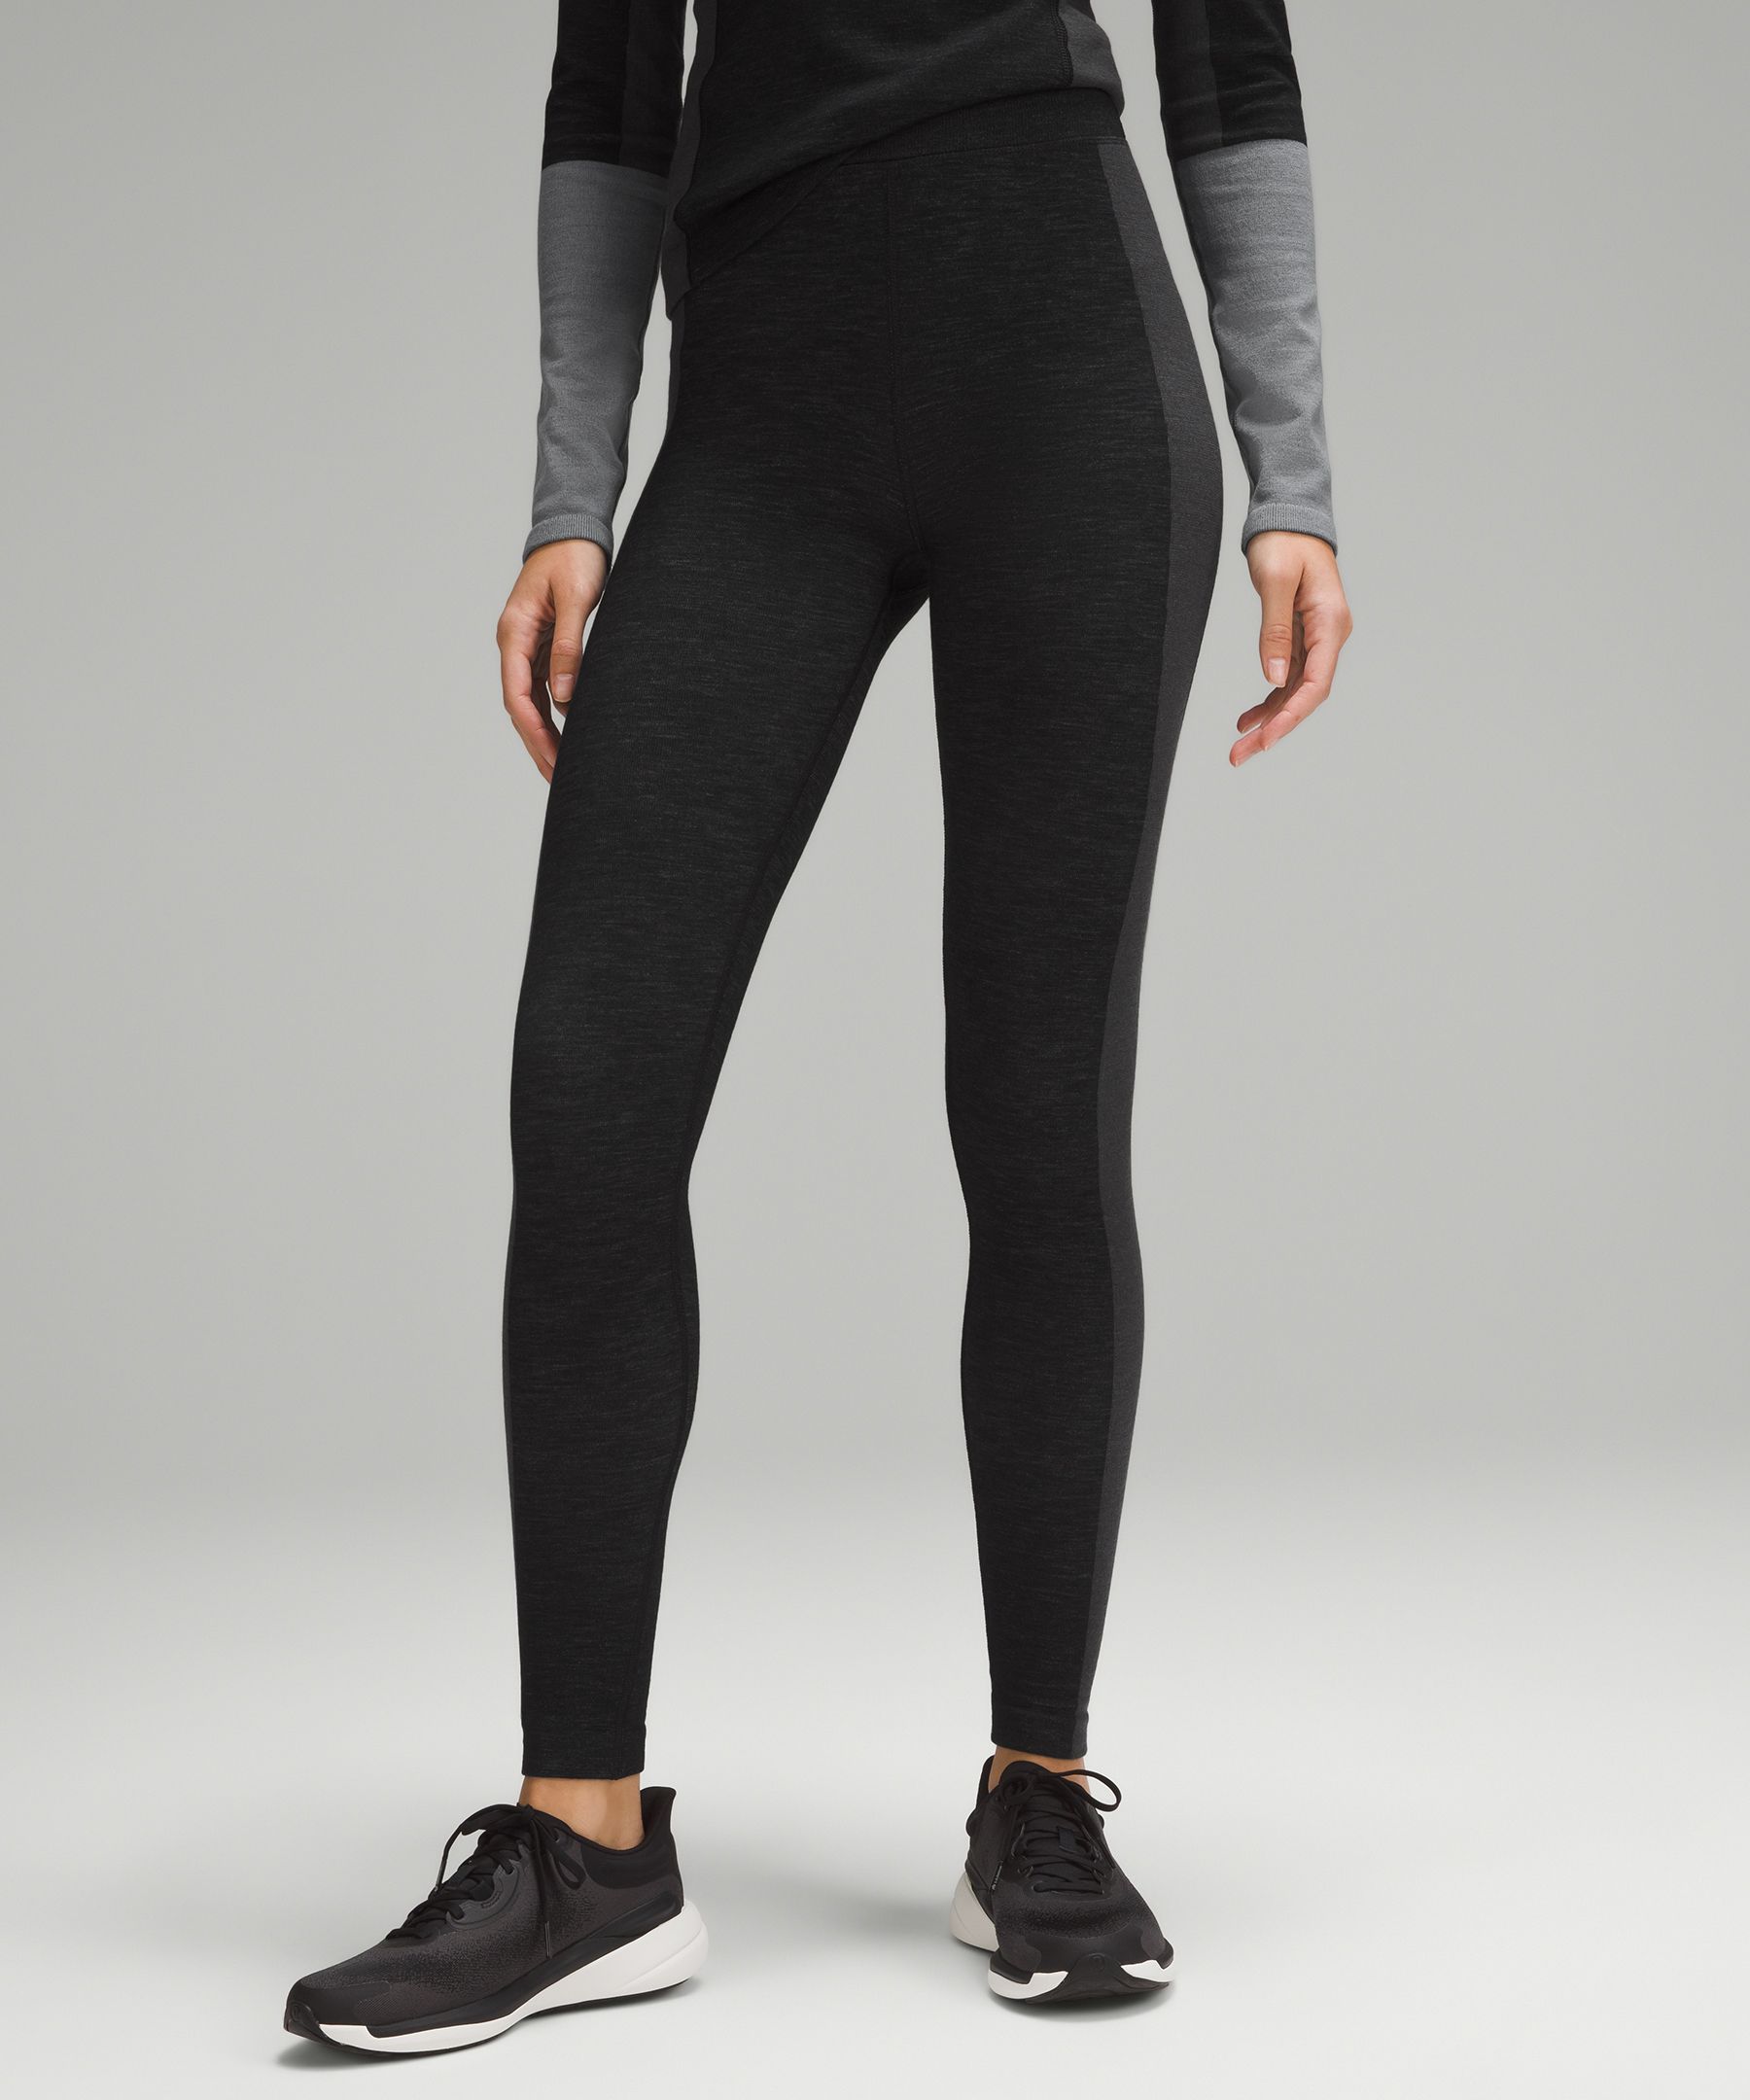 Lululemon Keep the Heat Thermal High-Rise Tight 28